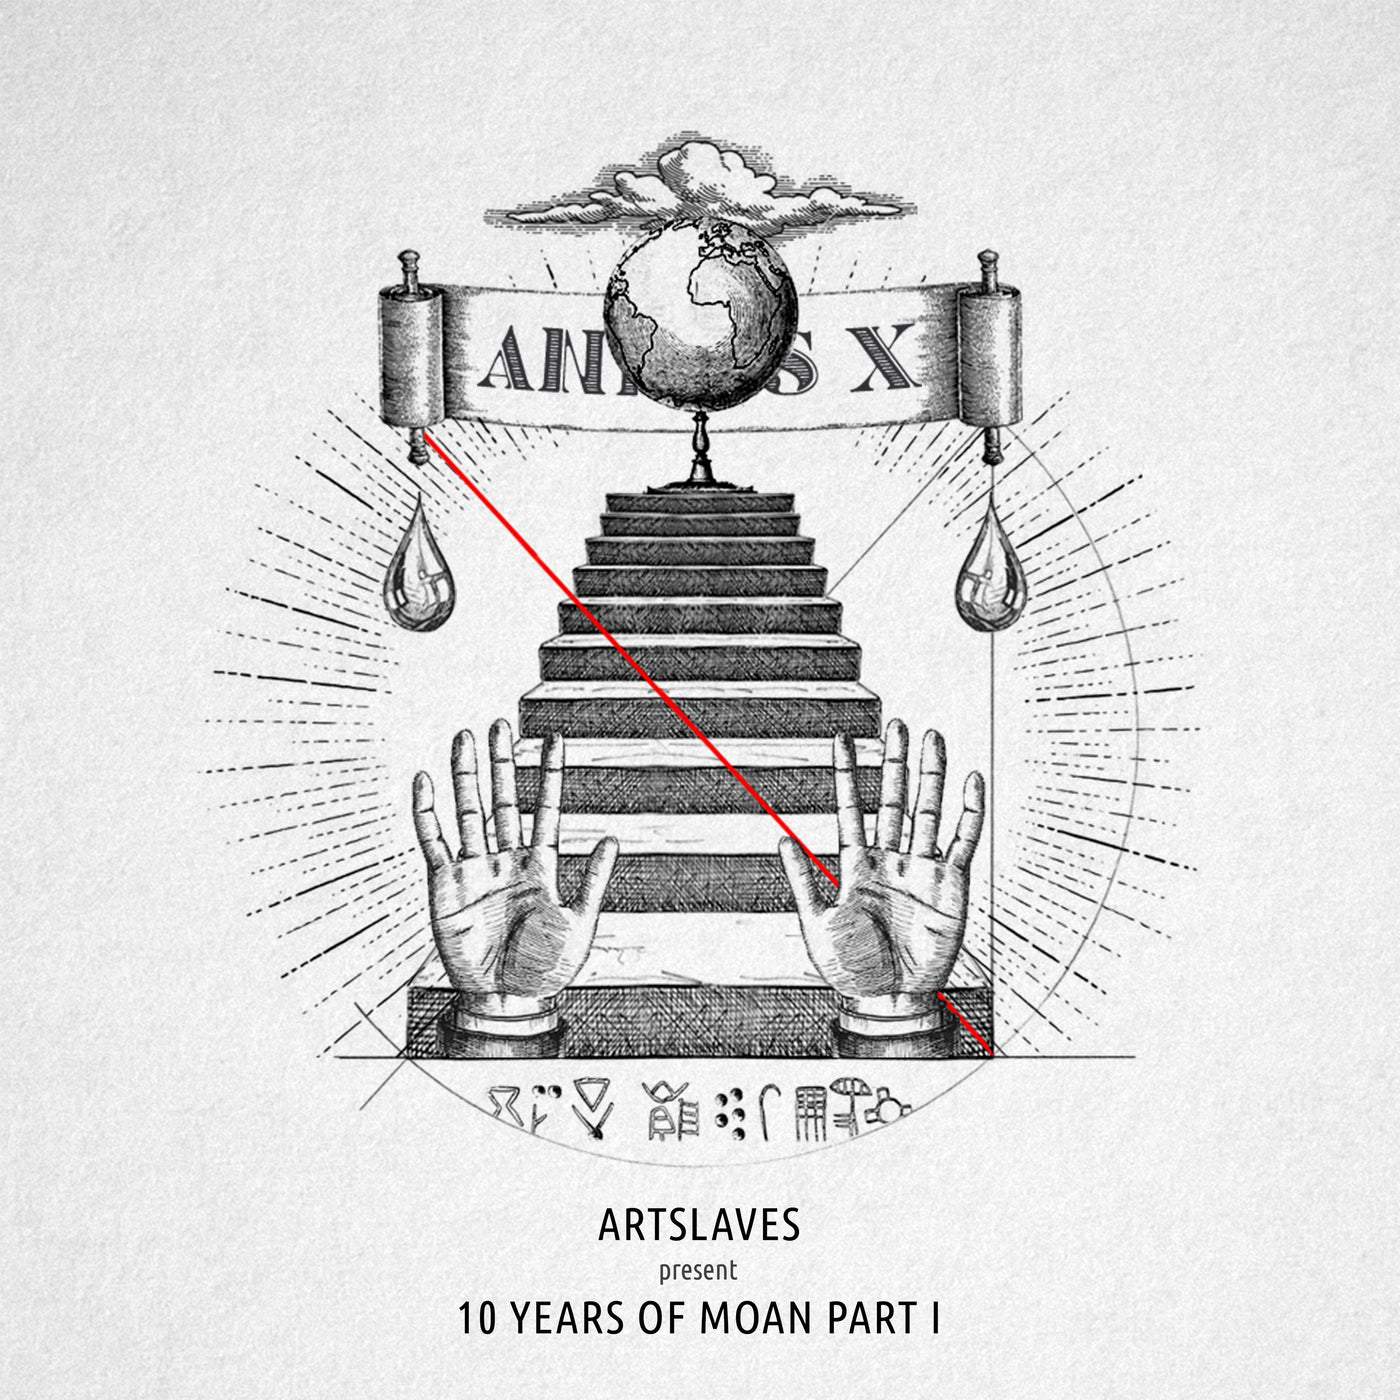 image cover: Artslaves - Artslaves Present 10 Years Of Moan Part 1 / MOANV33